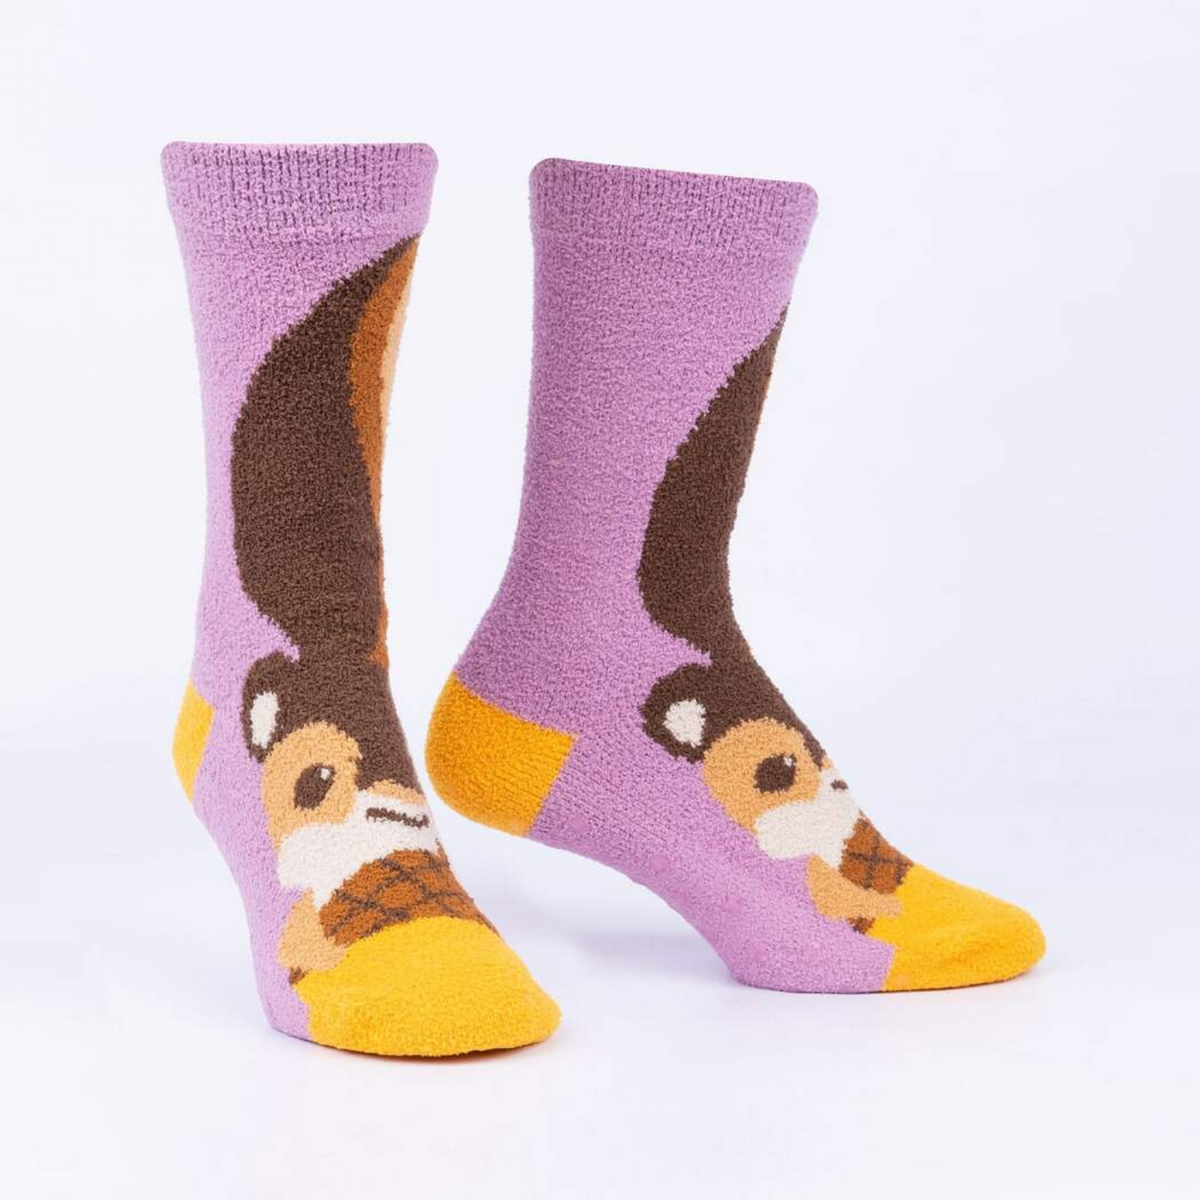 Sock It To Me I&#39;m Nuts About You women&#39;s slipper sock featuring purple sock with image of squirrel and nut. Slipper socks shown on display feet.. 